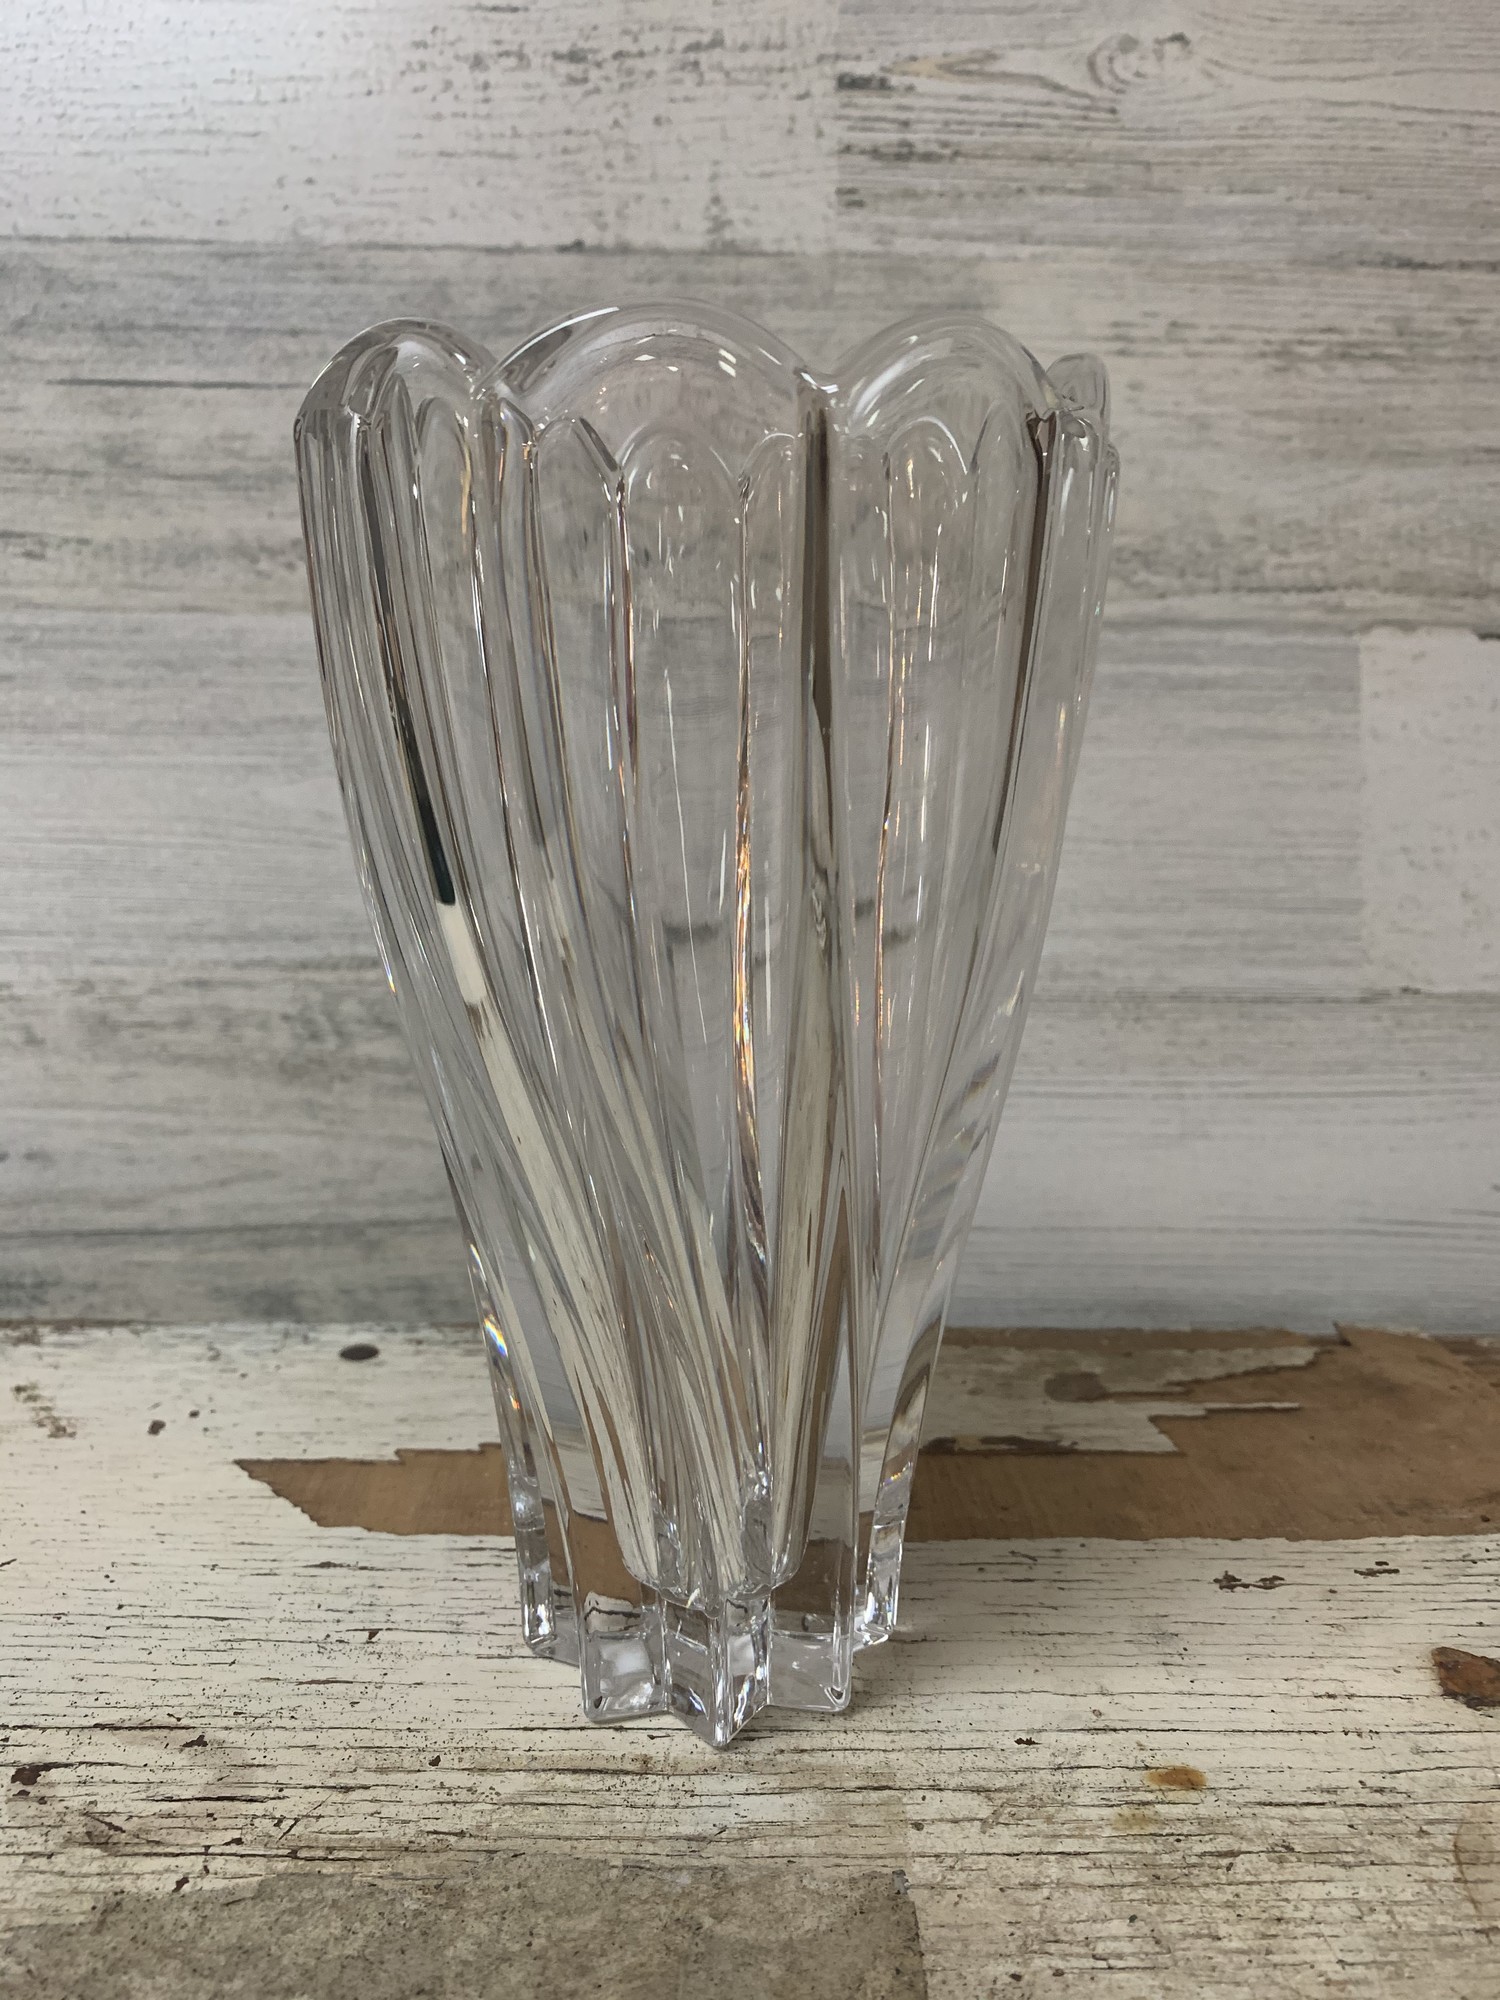 This beautiful crystal vase is made in Germany. Measures 8'' tall, 4 1/4'' top diameter, 2 1/2 base diameter.
No chips, no cracks, in very good pre-loved condition.
Please make sure to look at all the pictures.
Thank you.